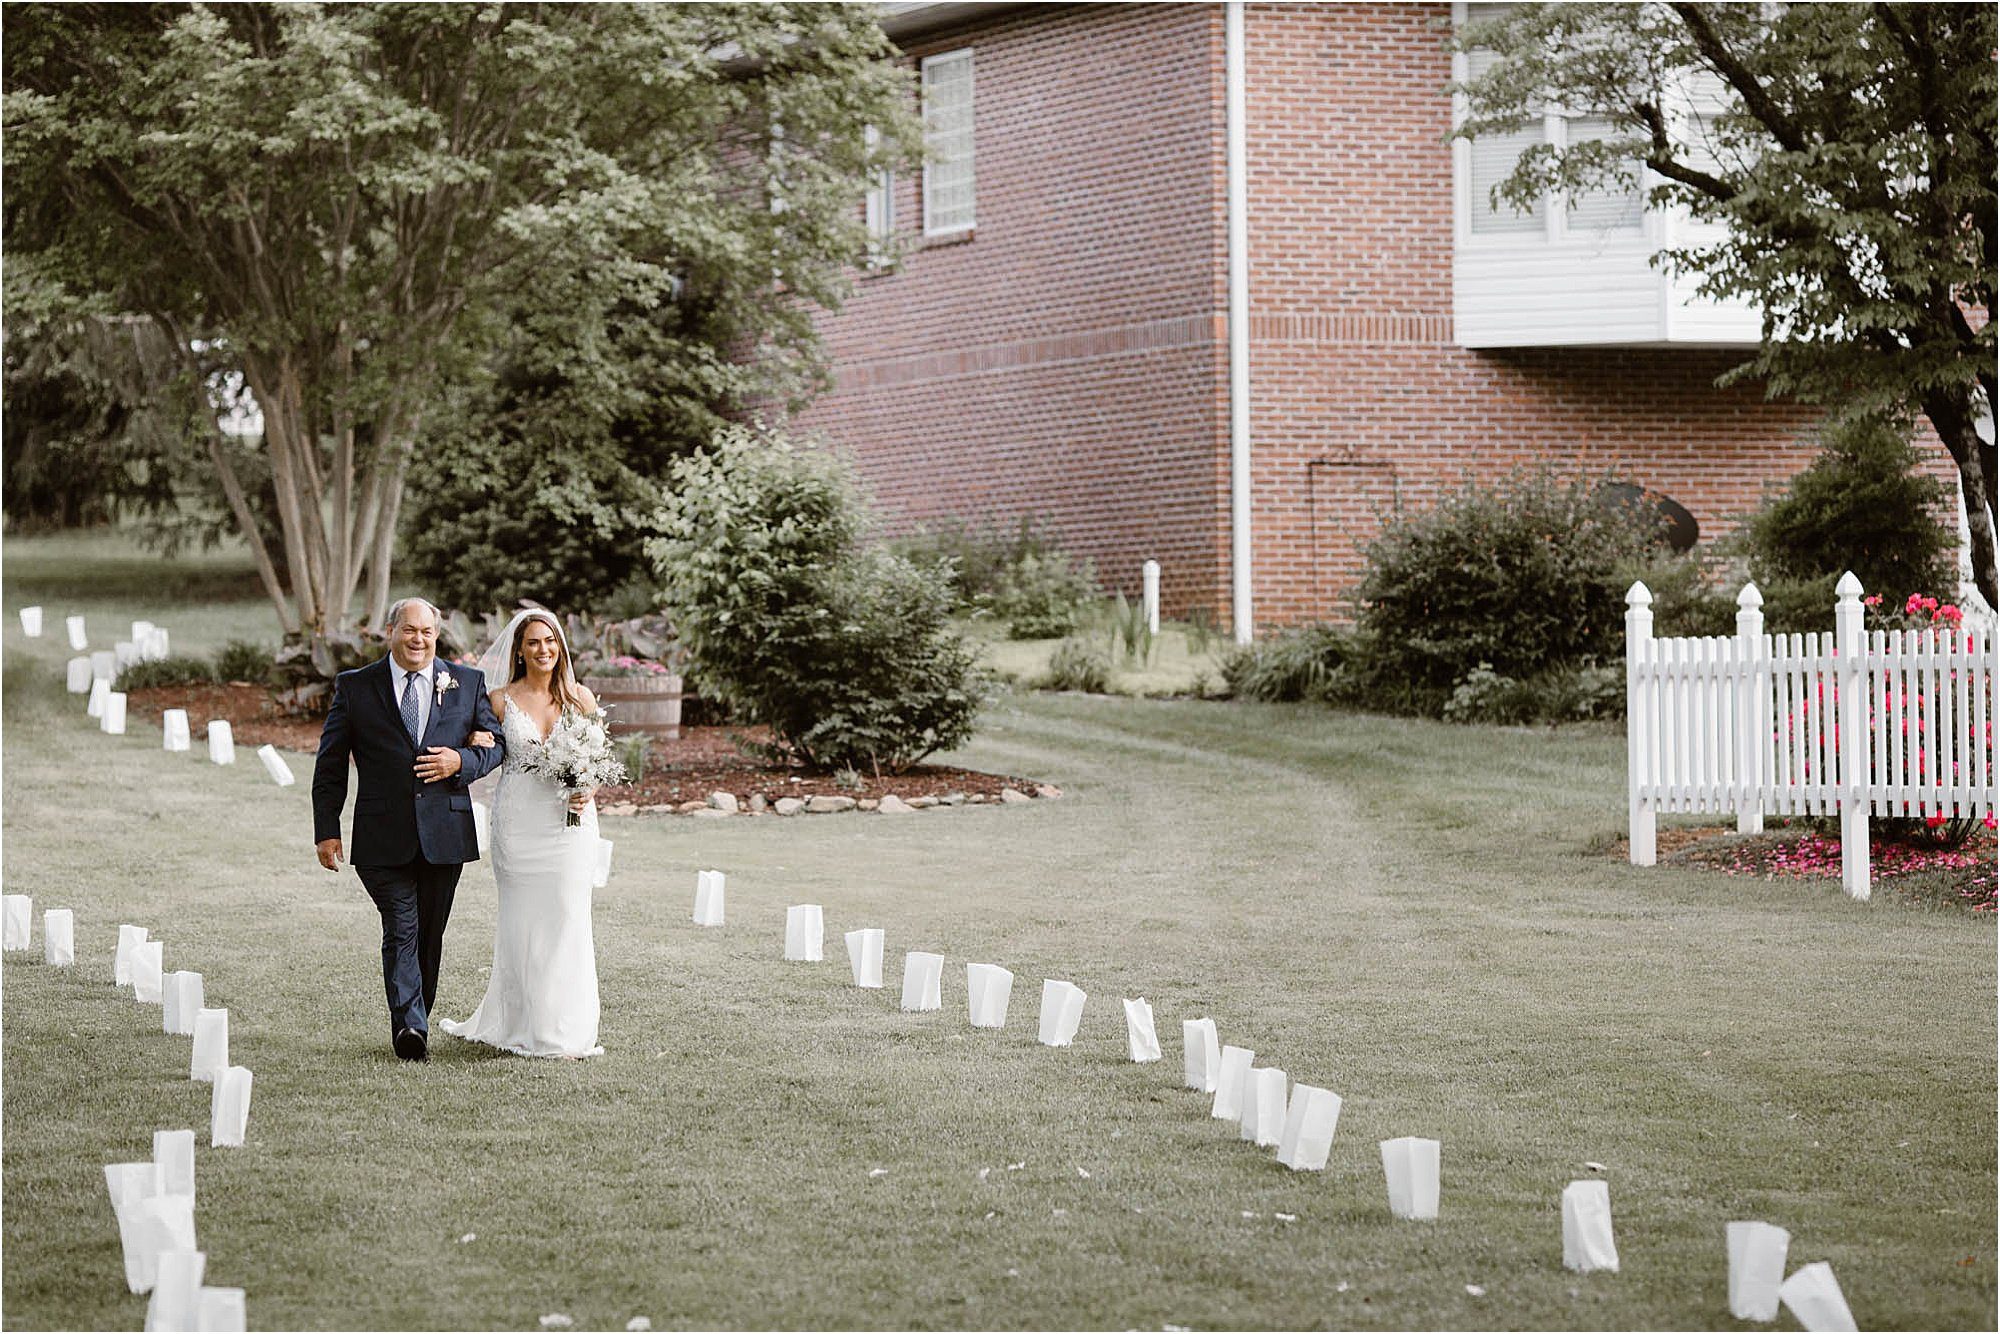 bride and father walking down aisle at backyard wedding ceremony